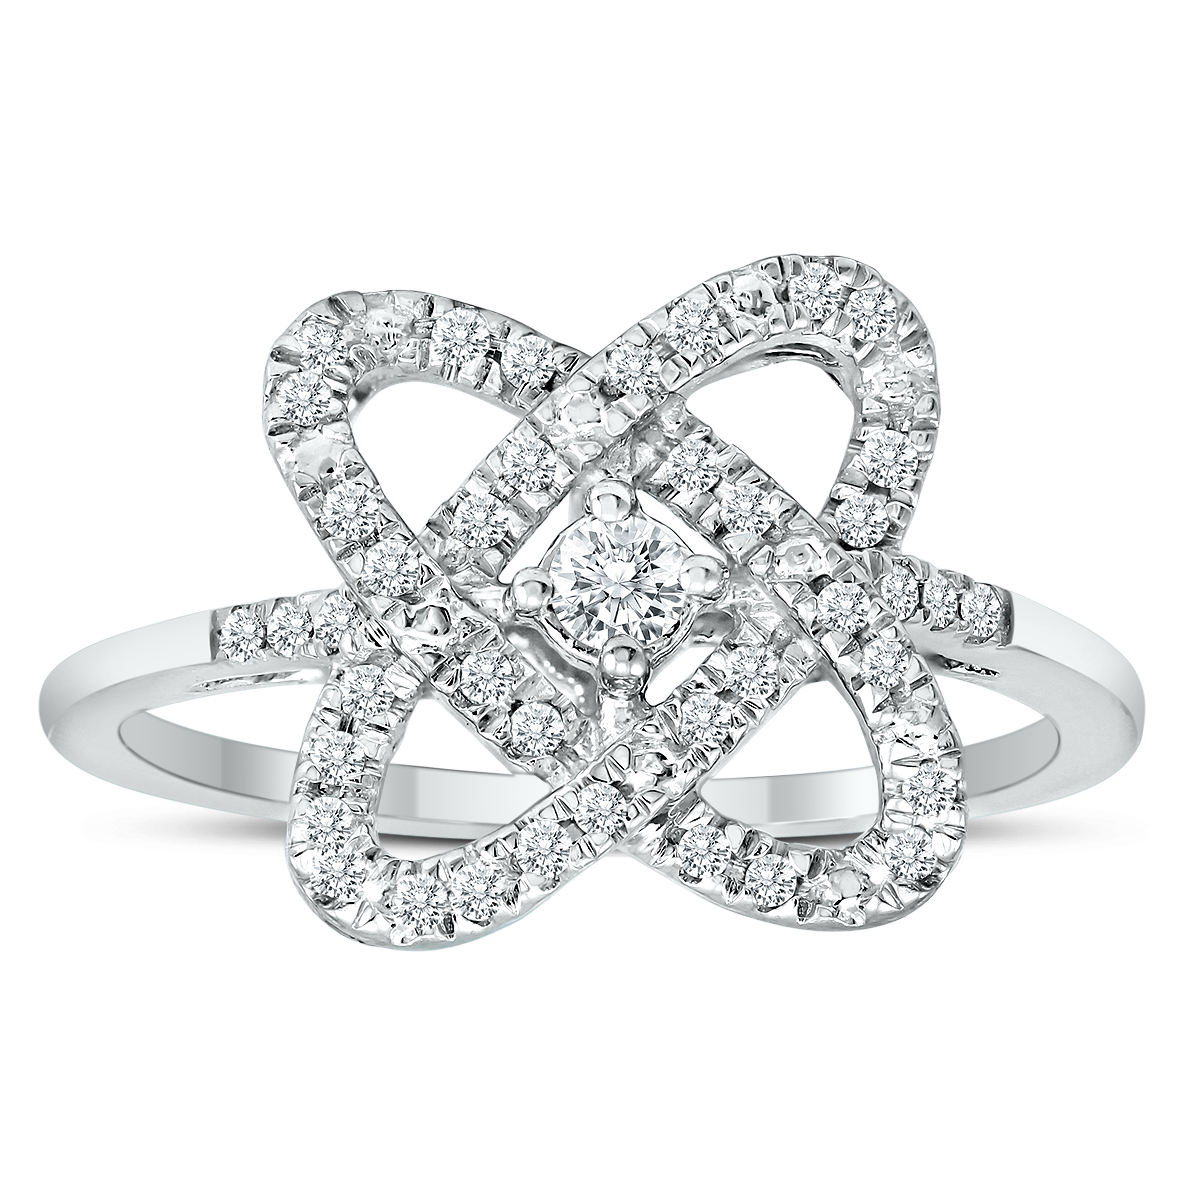 1/4 Carat TW Infinity Natural Diamond Ring in .925 Sterling Silver